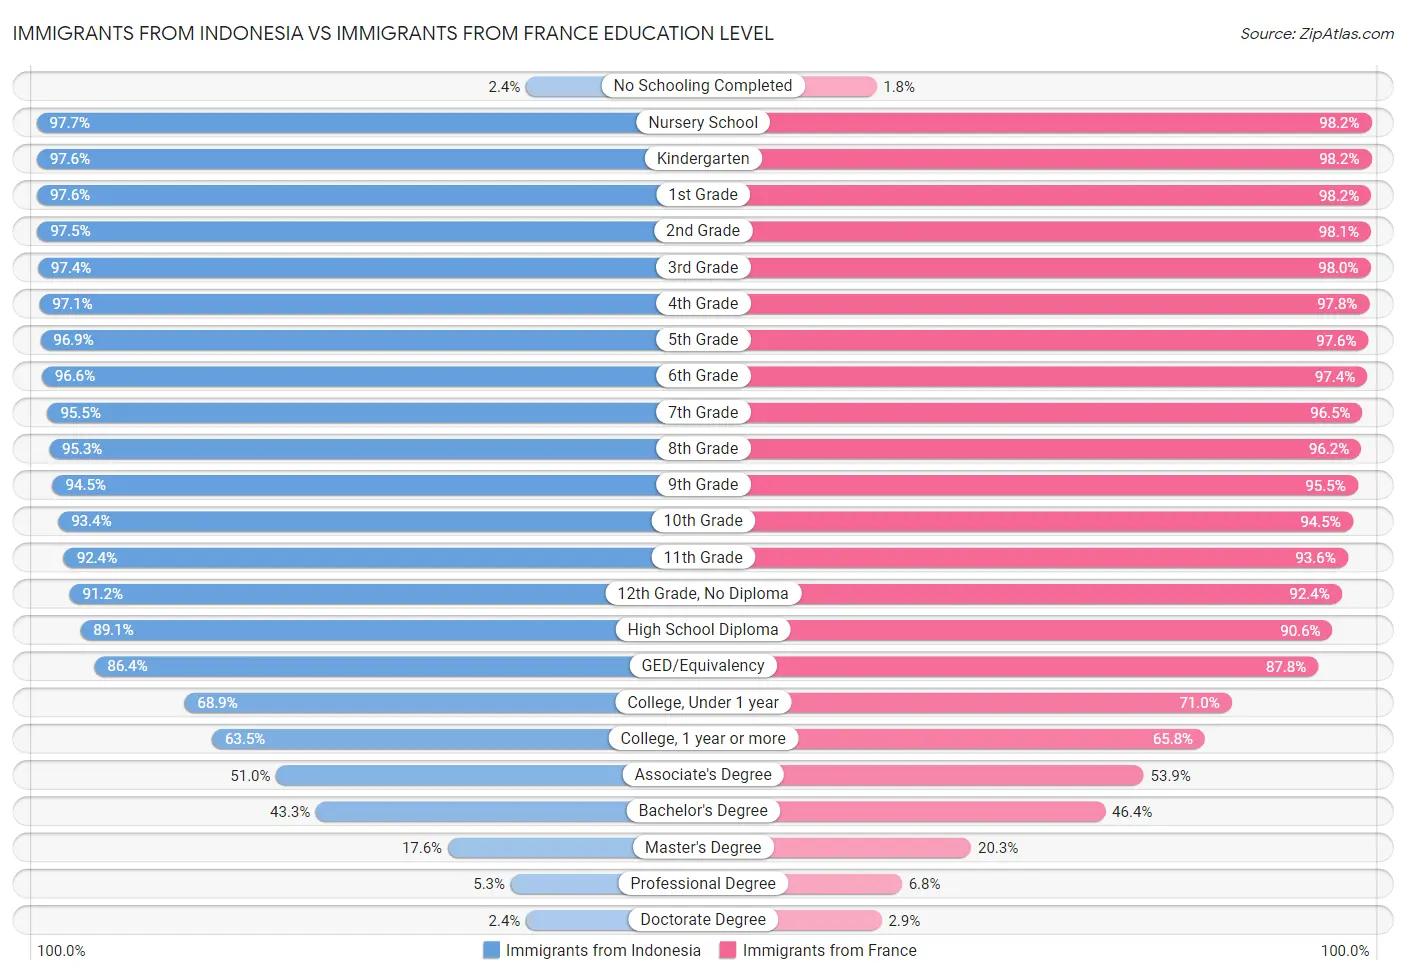 Immigrants from Indonesia vs Immigrants from France Education Level